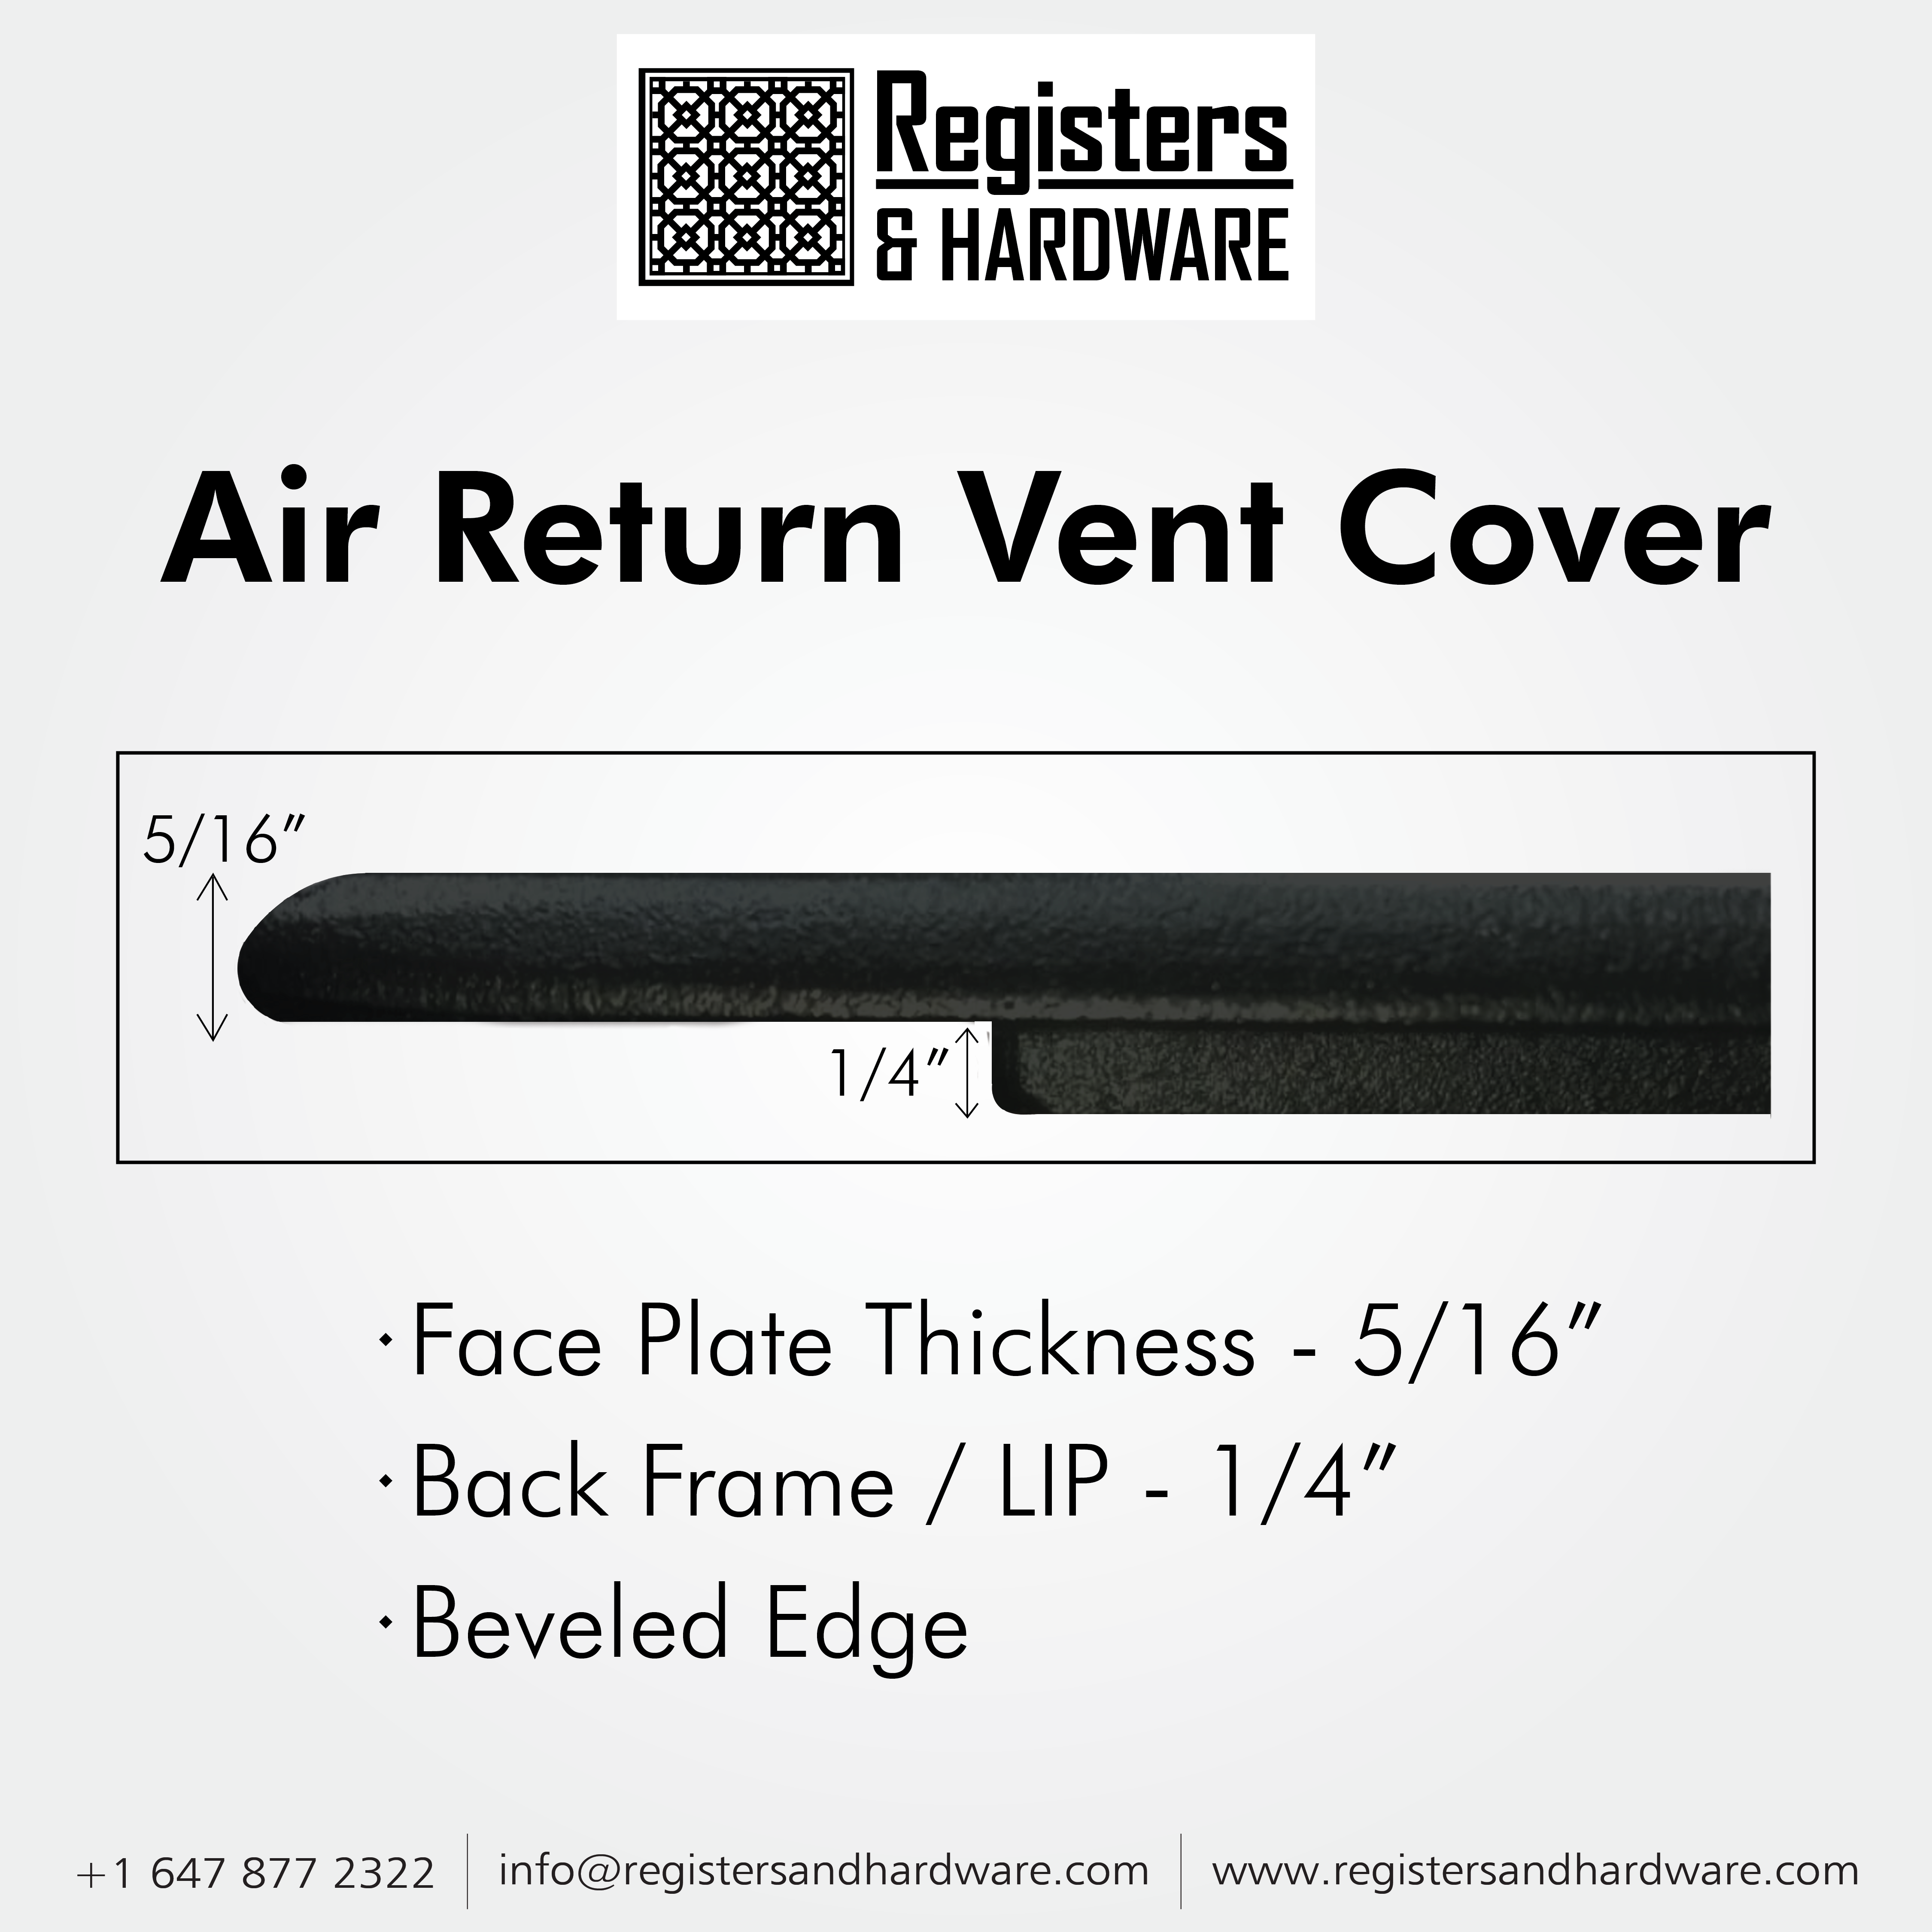 Achtek AIR RETURN 20"x24" Duct Opening (Overall Size 22"x26") | Heavy Cast Aluminum Air Grille HVAC Duct || Powder Coated